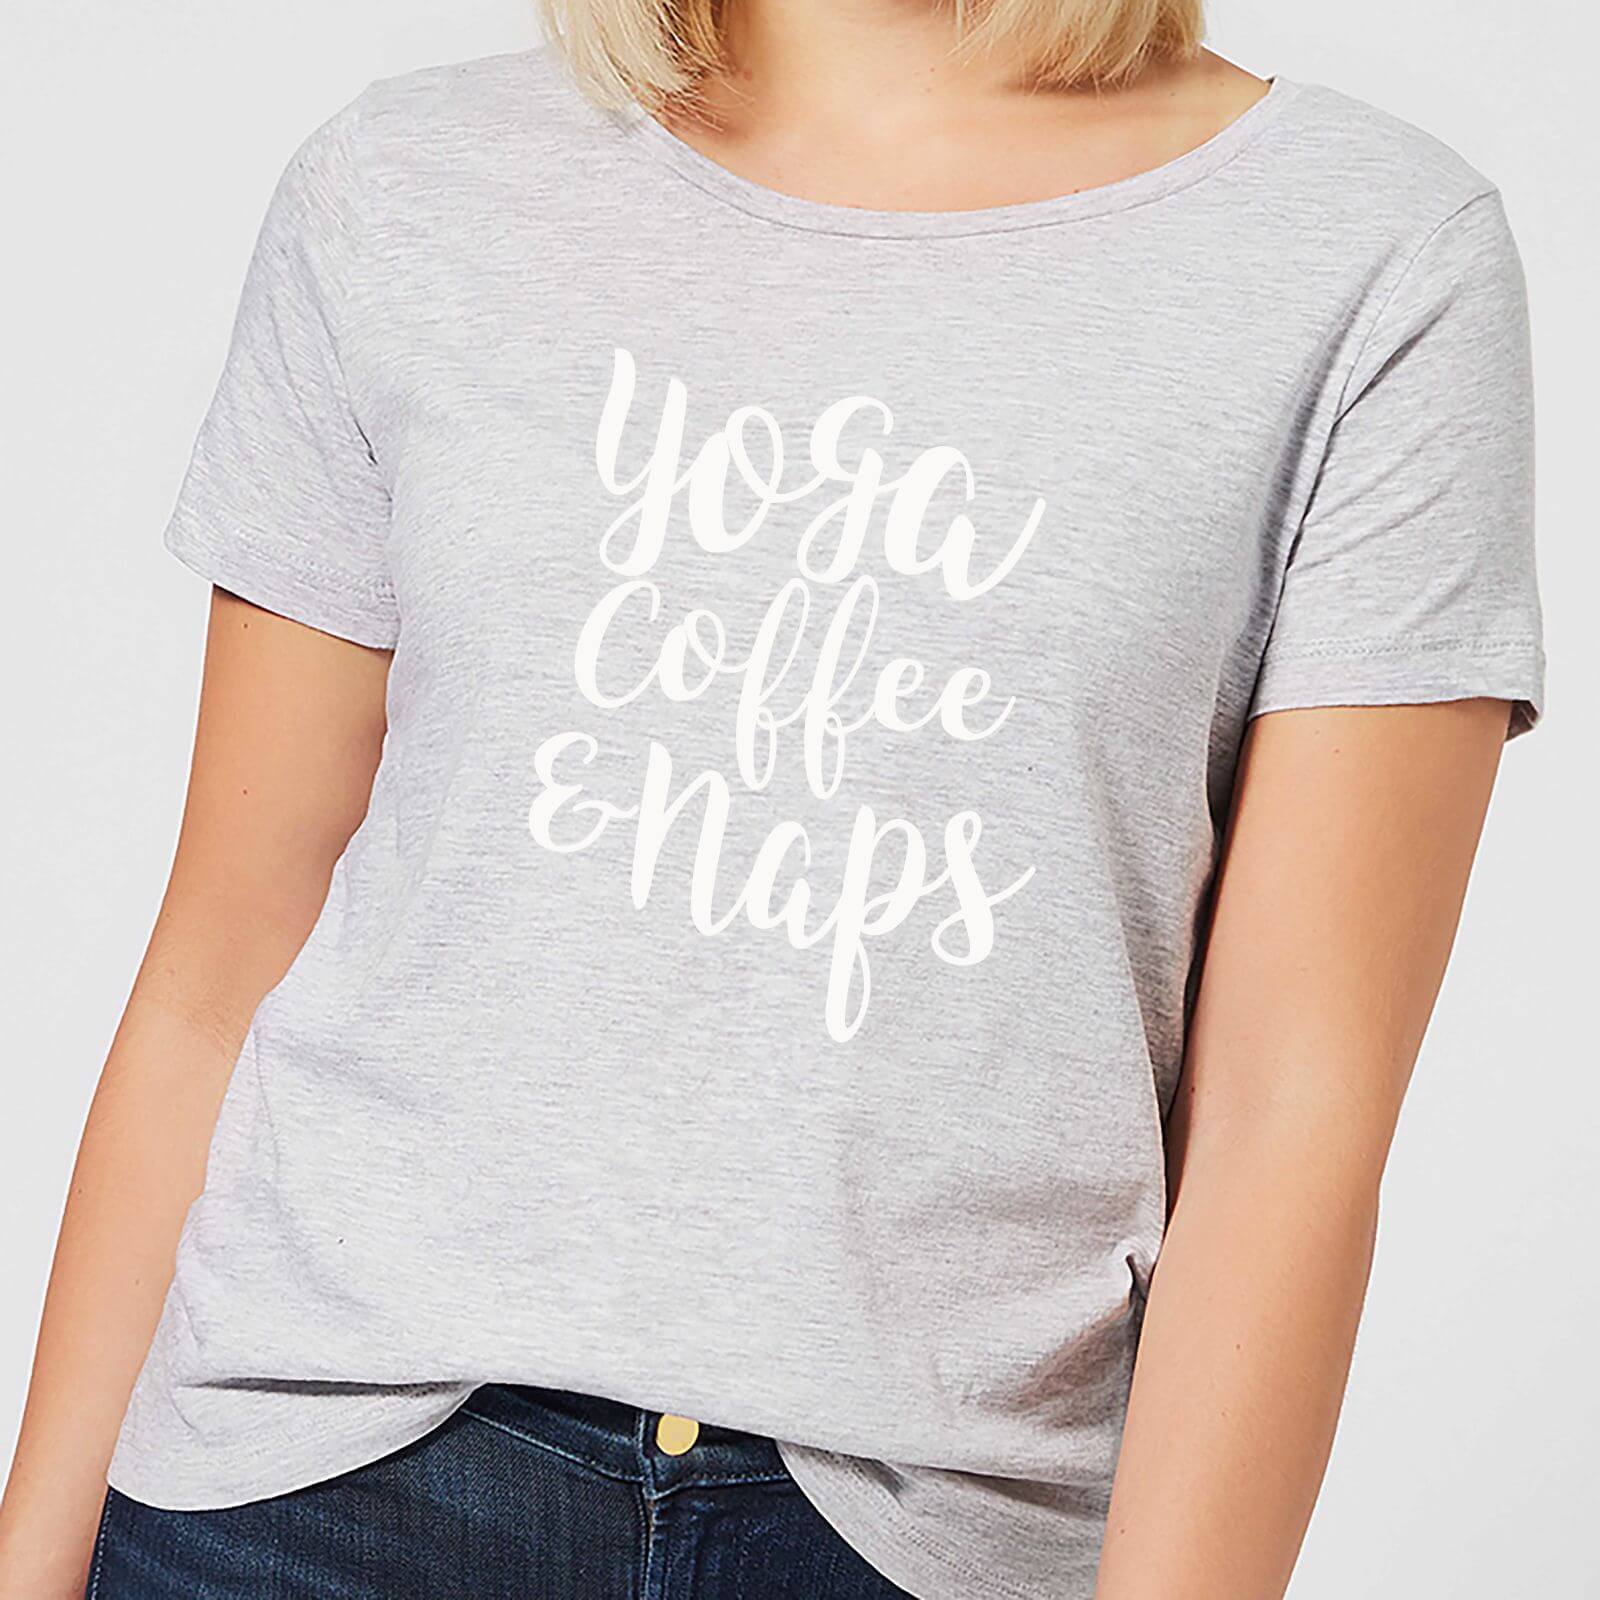 By IWOOT Yoga Coffee and Naps Women's T-Shirt - Grey - 3XL - Grey